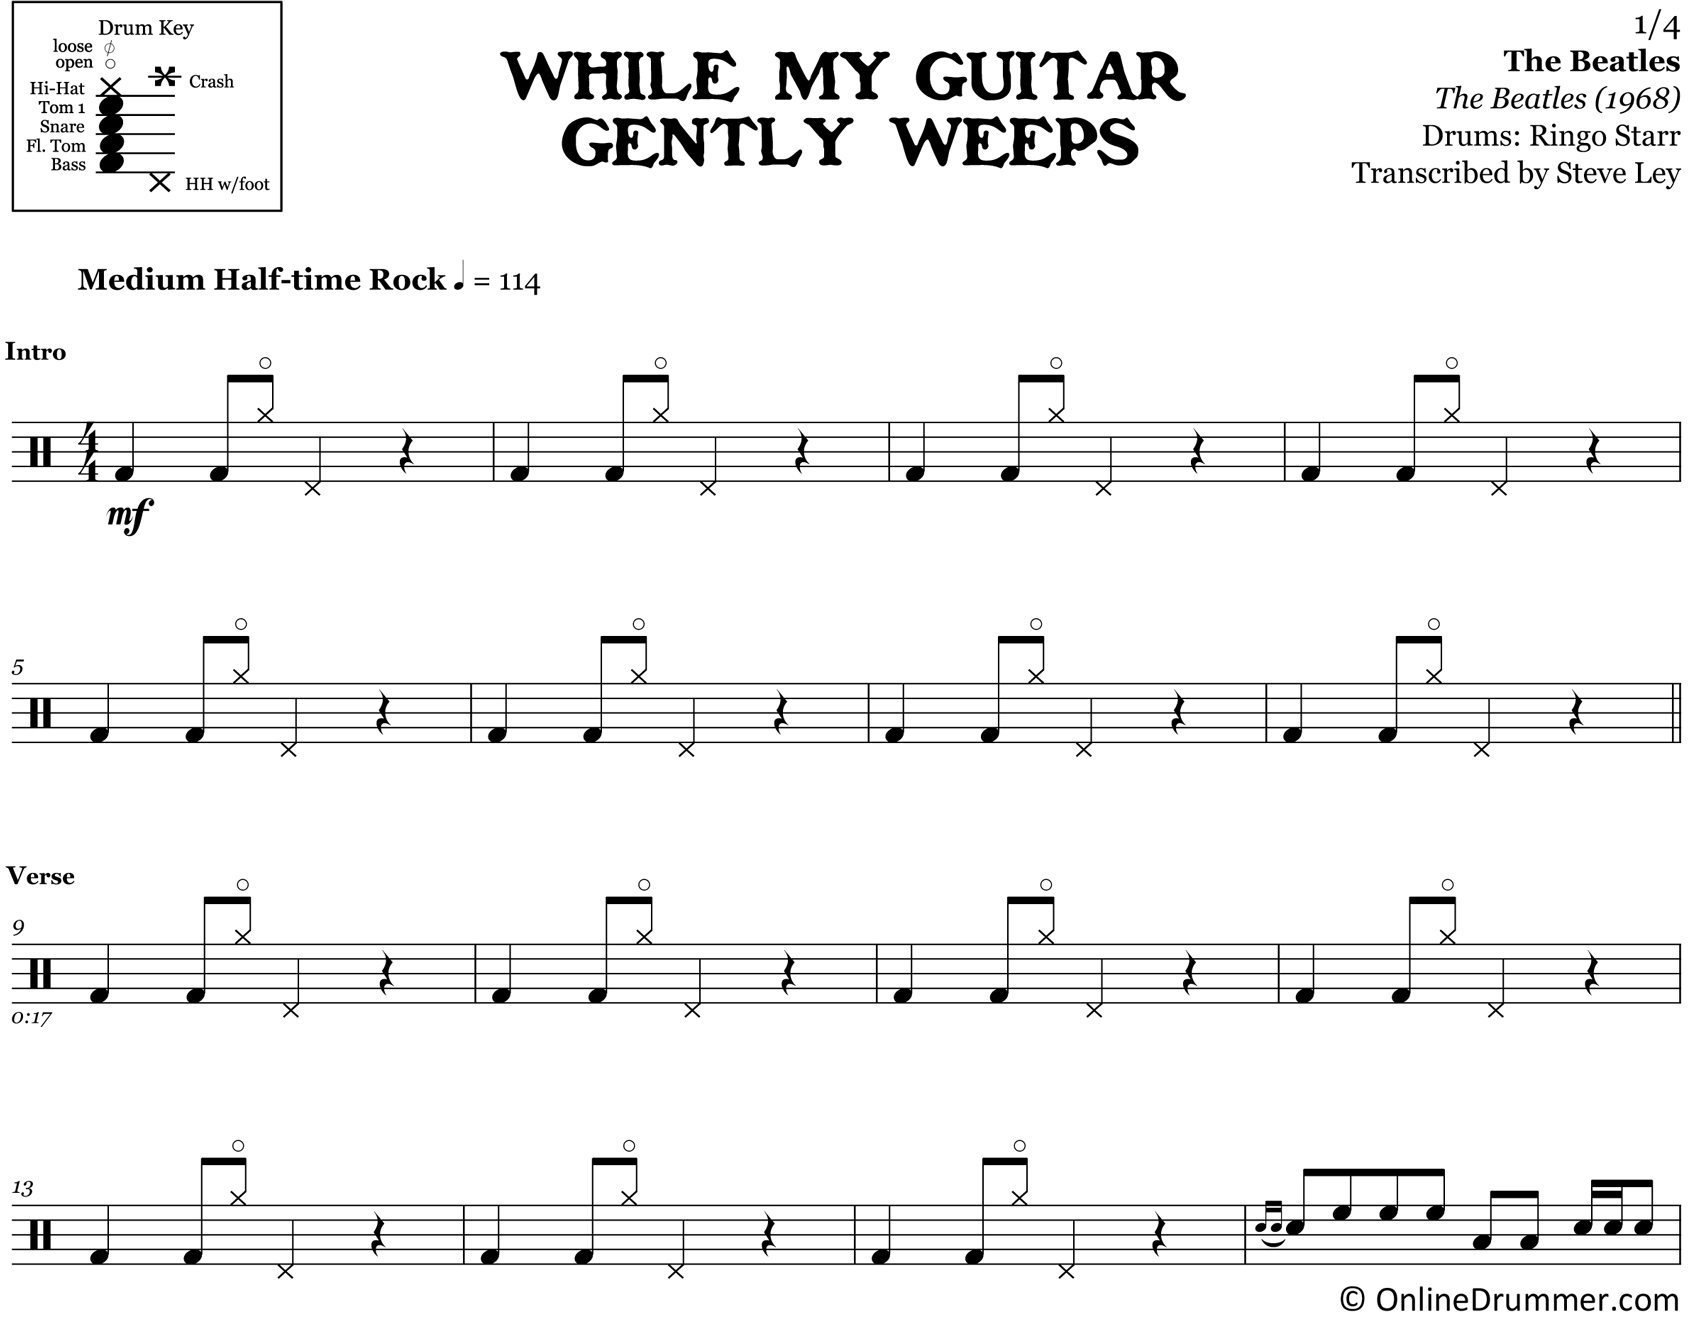 While My Guitar Gently Weeps - The Beatles - Drum Sheet Music